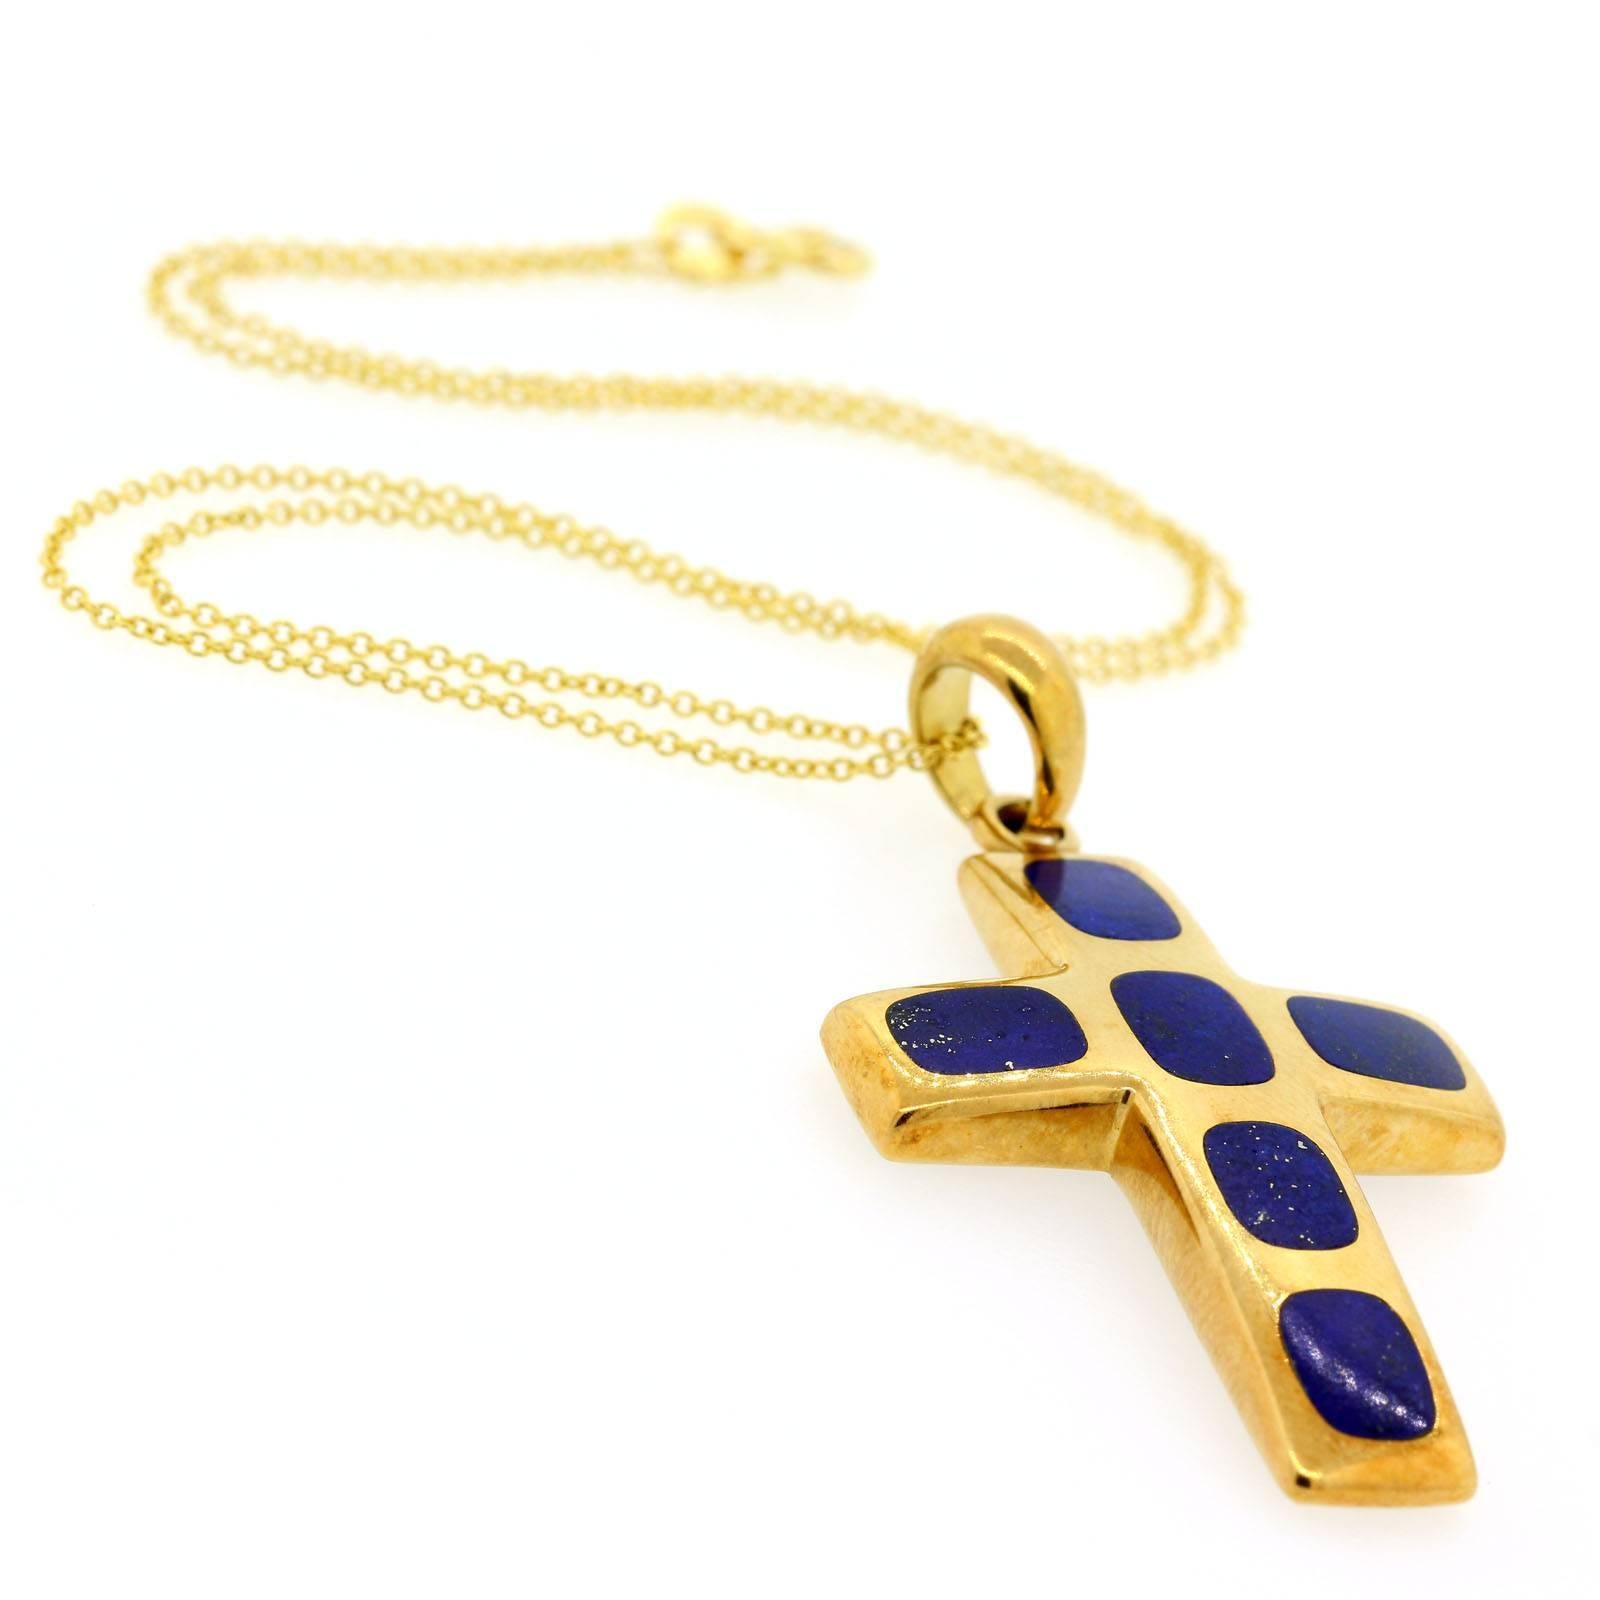 A beautiful 1970s Italian 18KT yellow gold cross with six cushion shape inlaid Lapis Lazuli stones. The cross is suspended from a 14KT yellow gold 16 inch box link chain, and measures 2 inches high by 1 1/8 inches wide.  The bail is stamped 